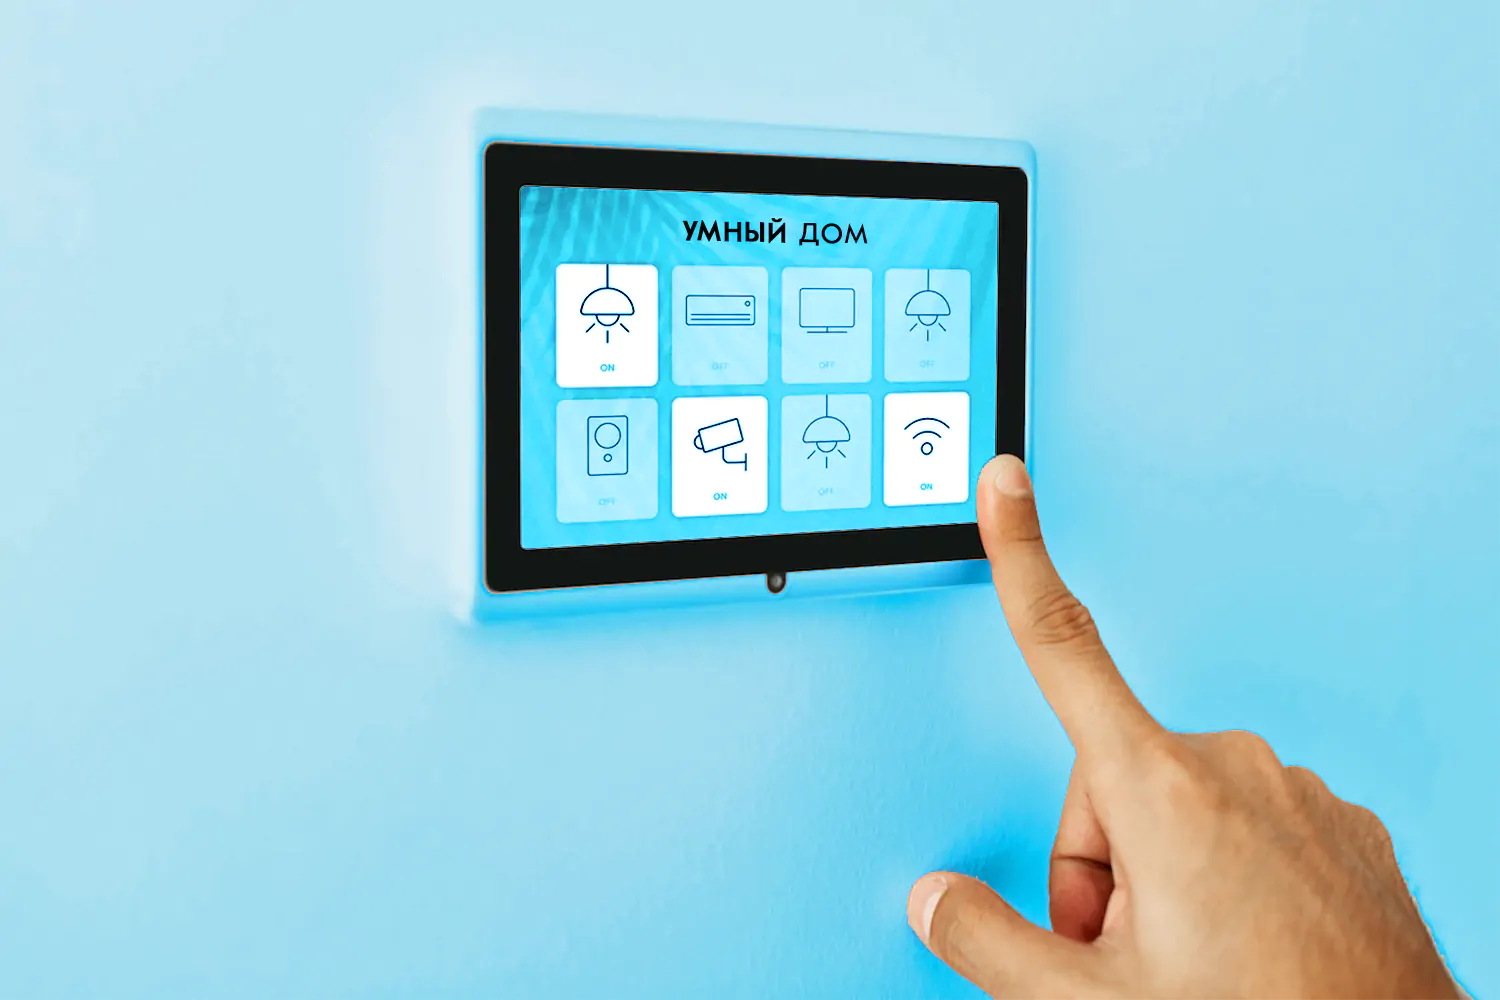 finger-pressing-on-smart-home-automation-panel-monitor-smart-home-neiroom